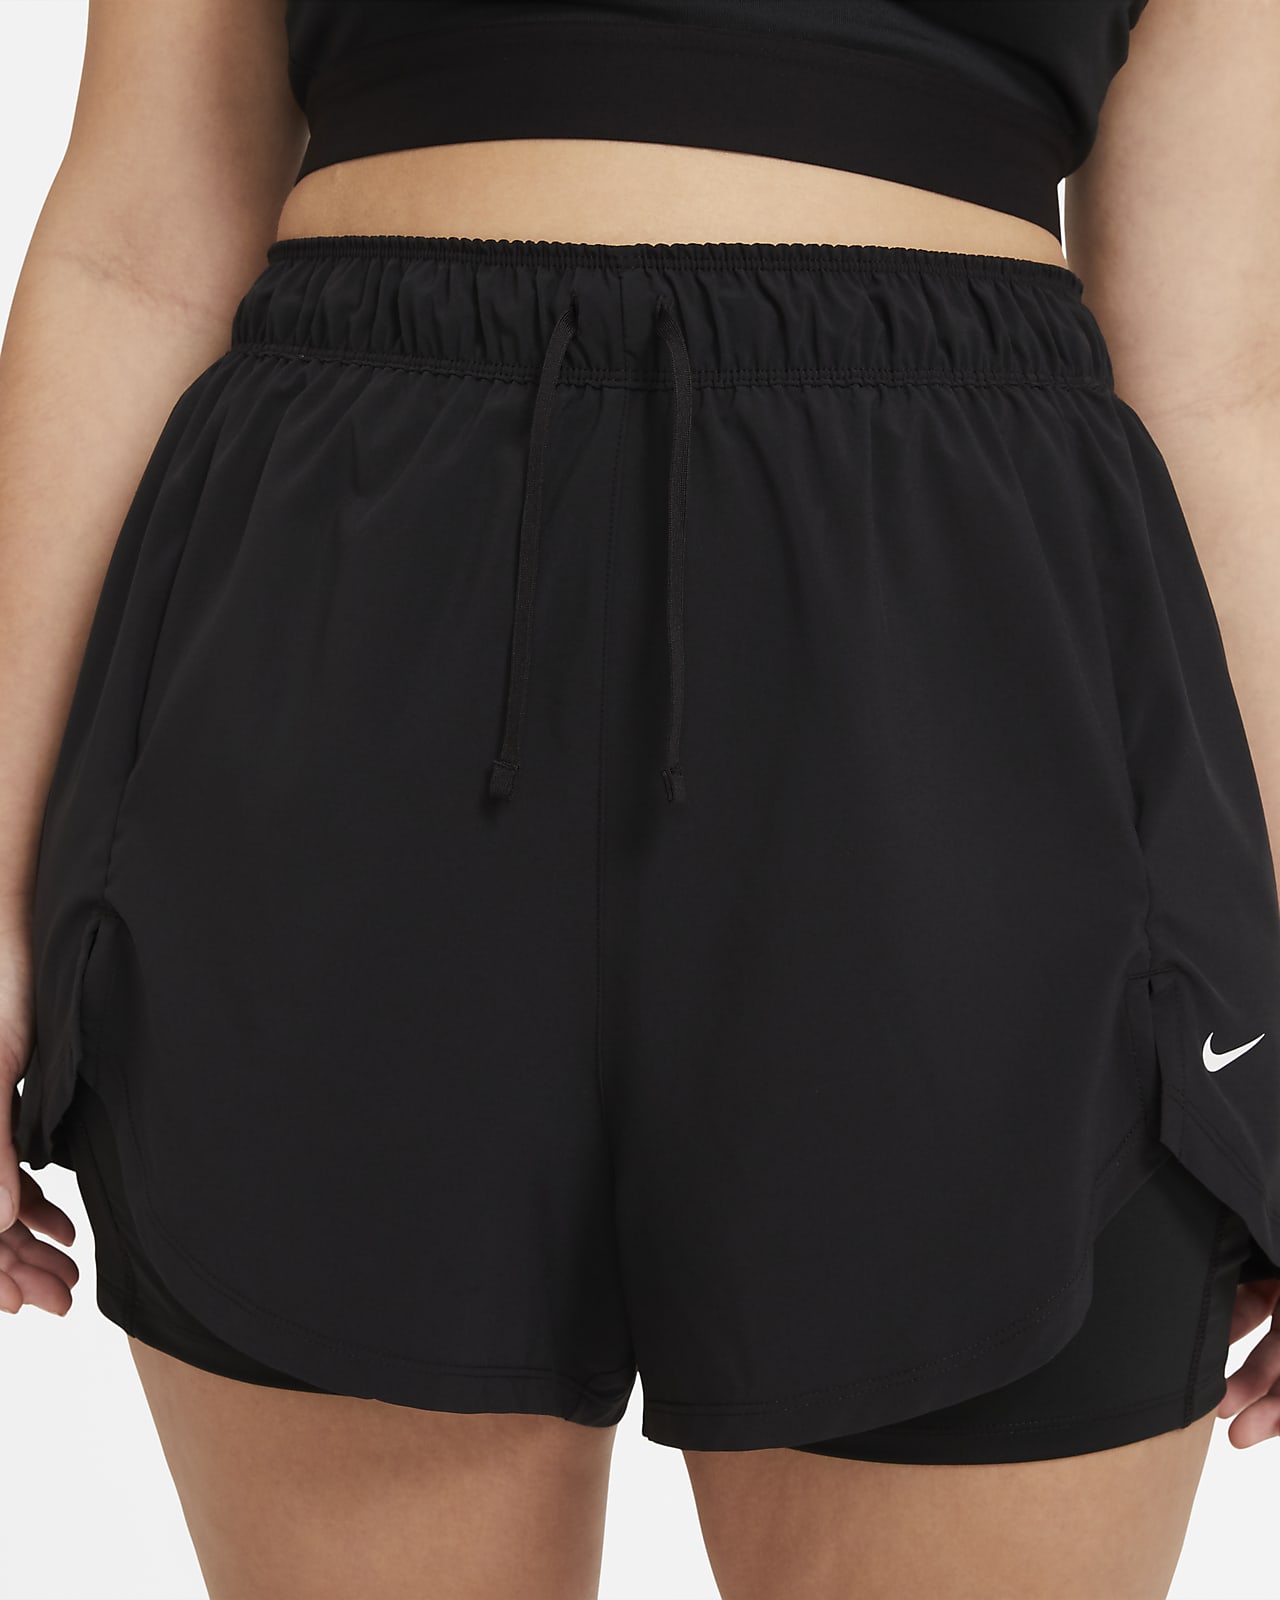 Nature Portrayal Abandoned Nike Flex Essential Women's 2-in-1 Training Shorts (Plus Size). Nike CA